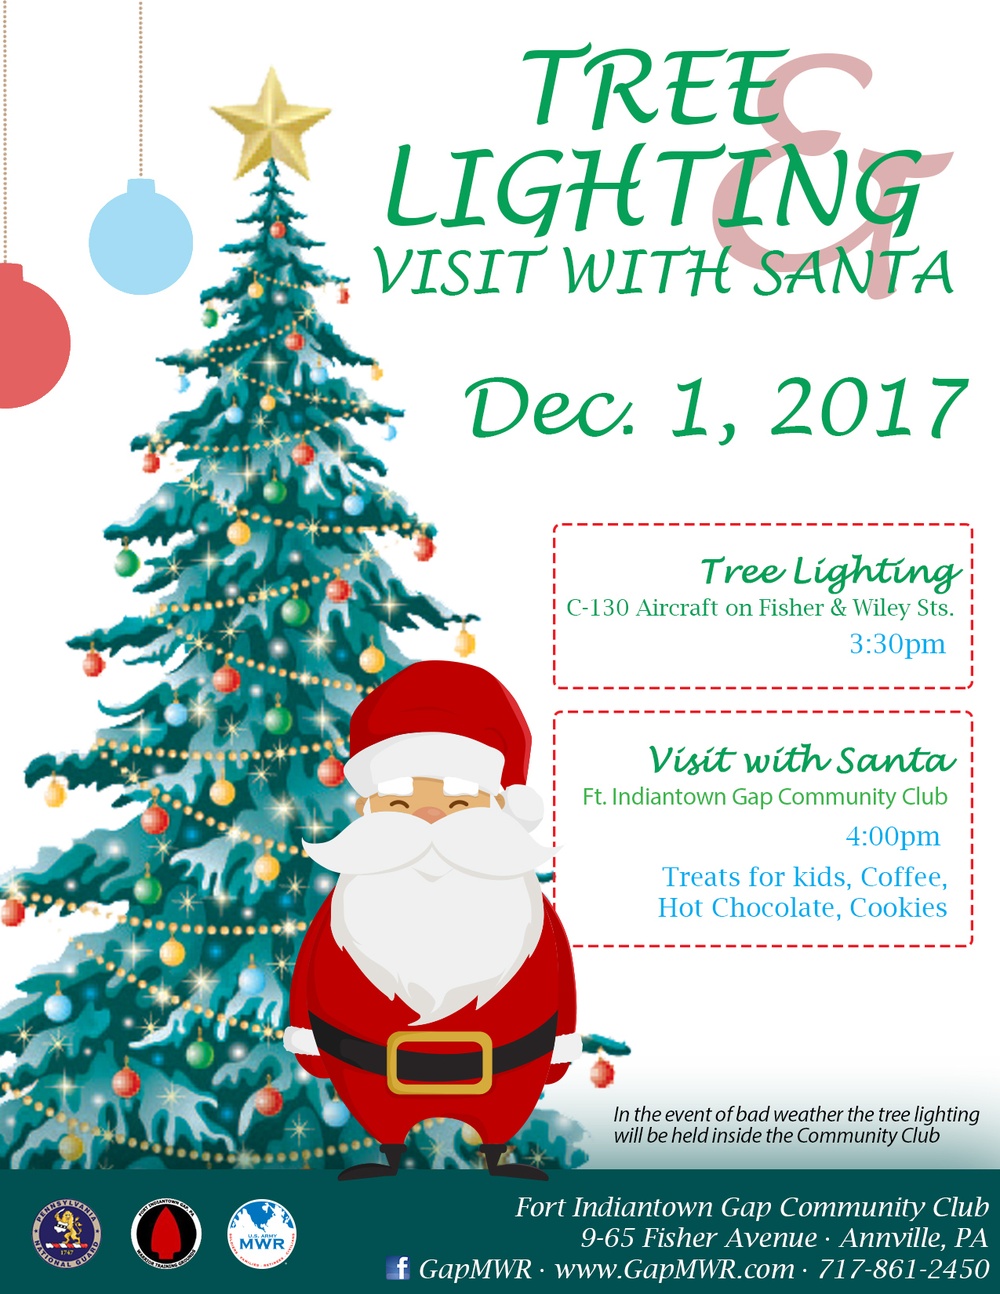 Public invited to tree-lighting ceremony at Fort Indiantown Gap